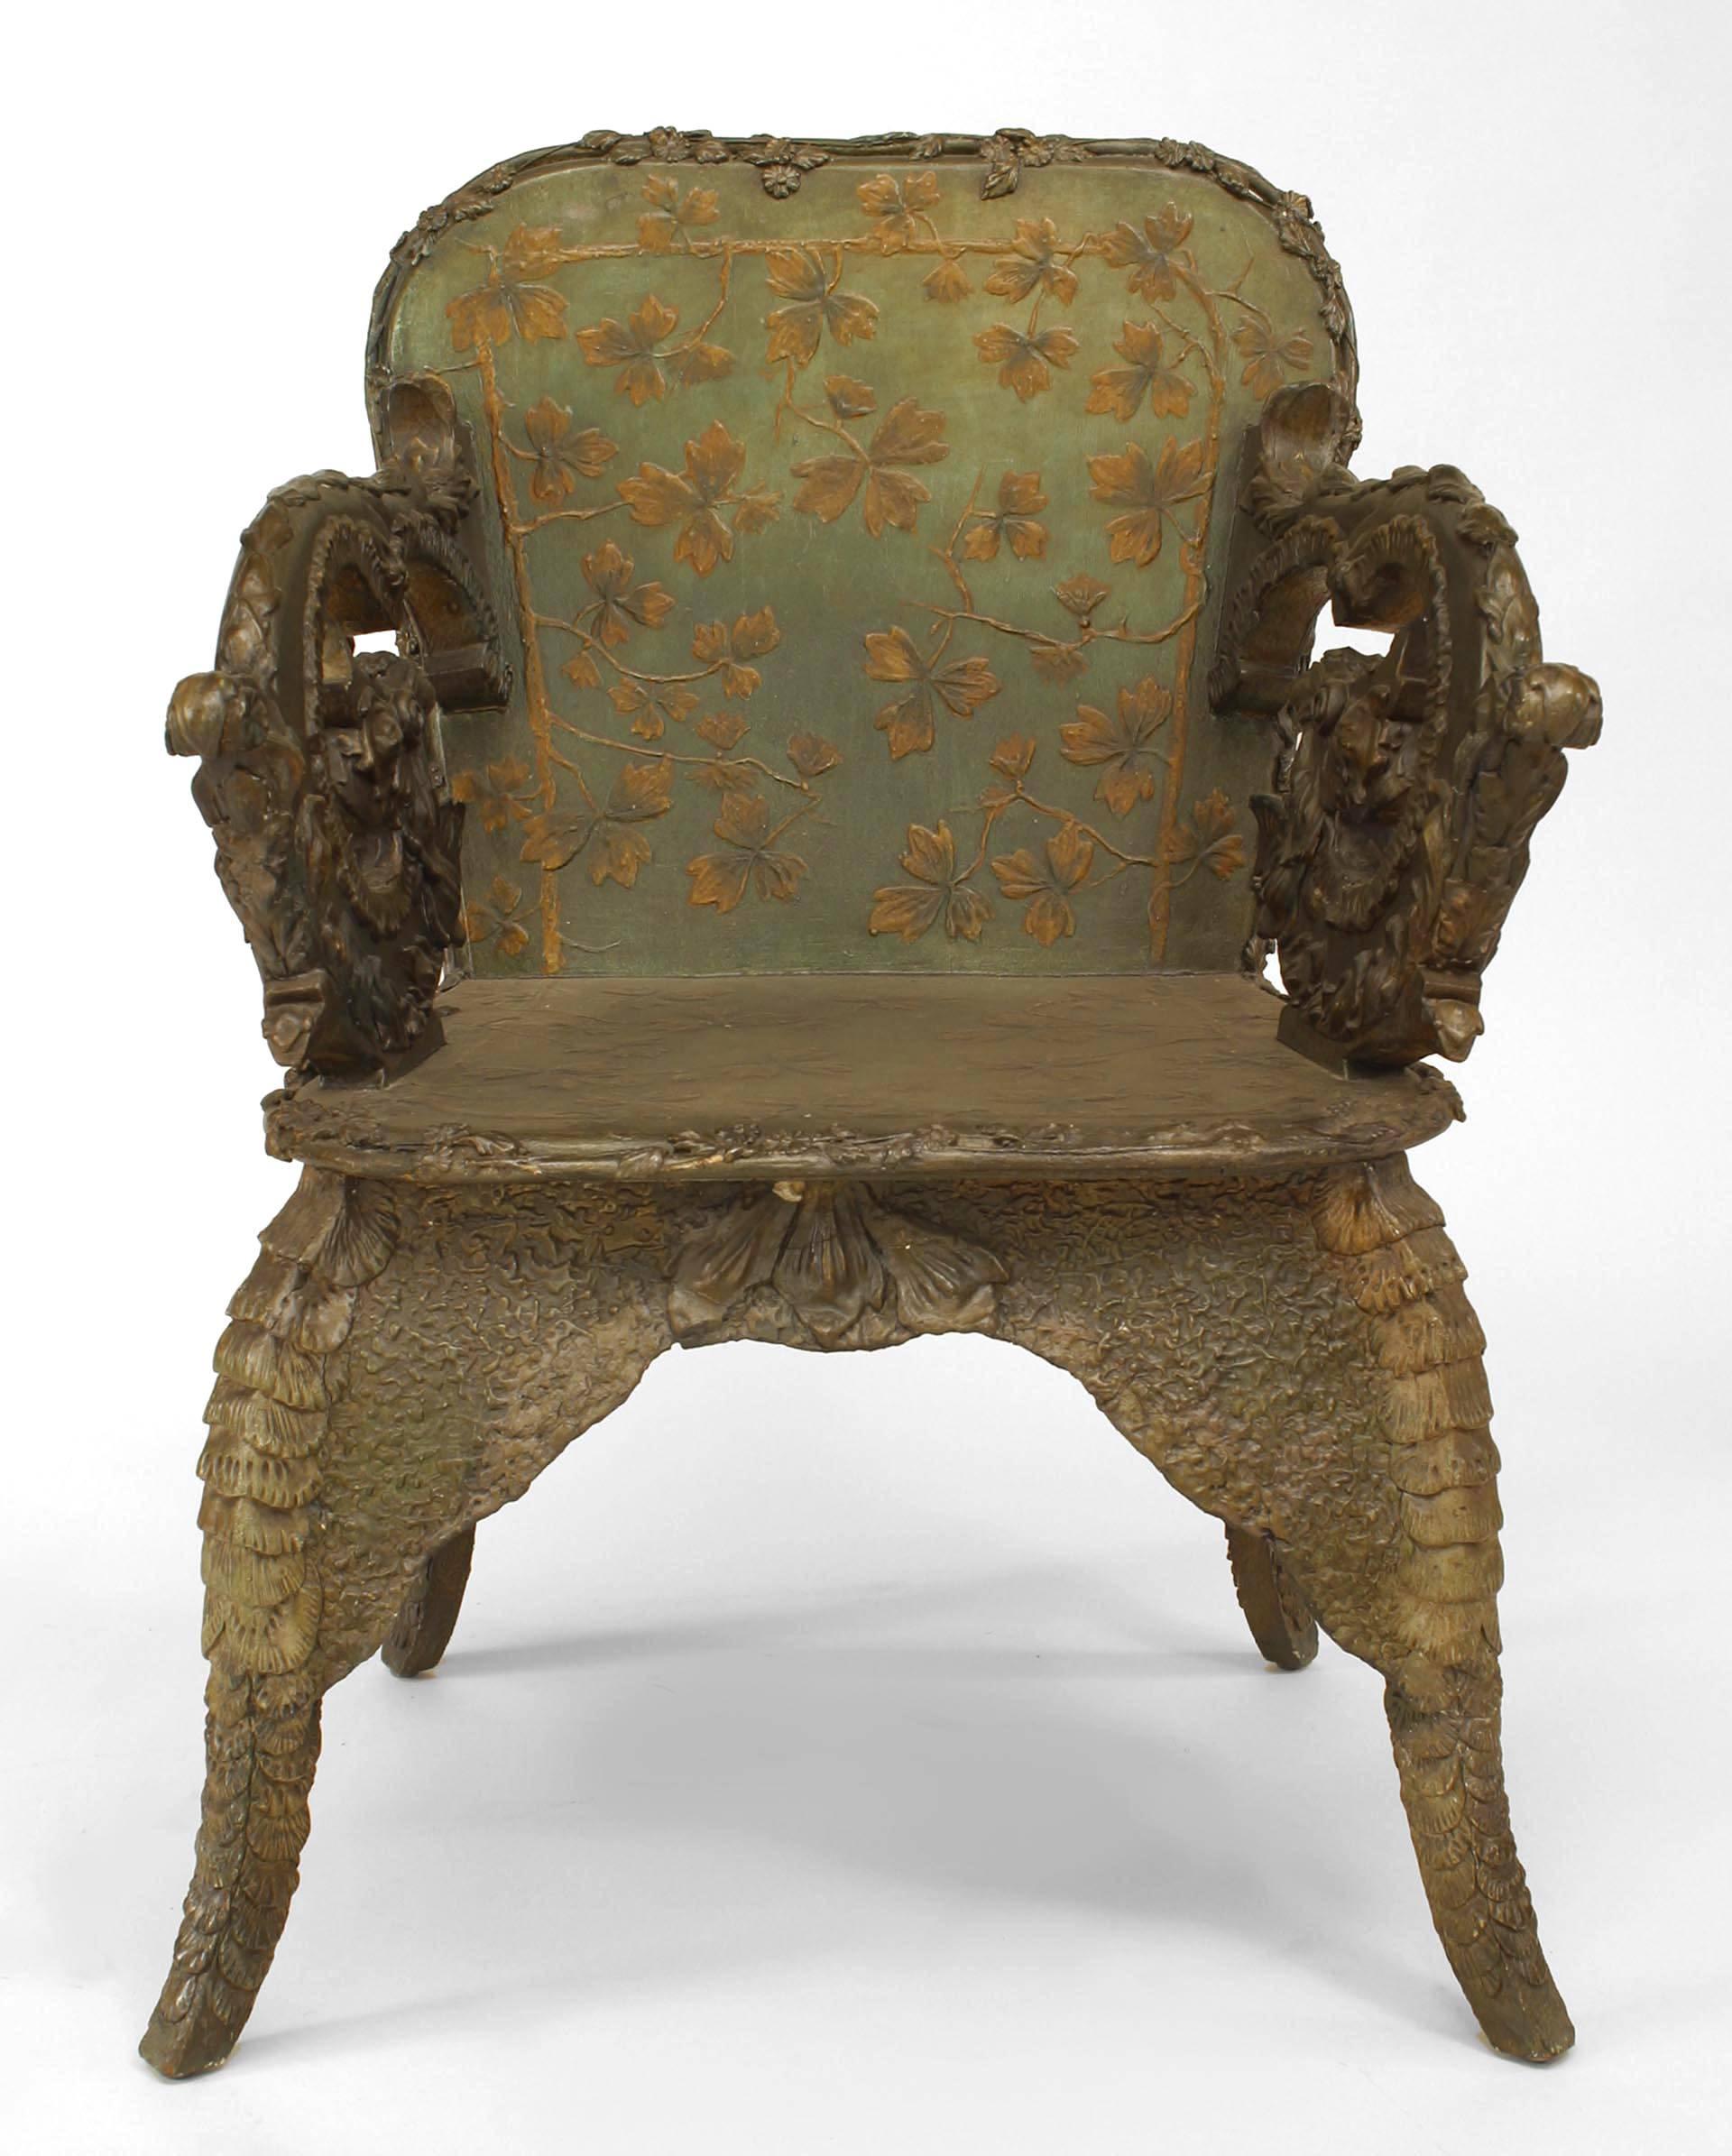 2 Similar Continental Austrian style (19th Century) scale design and floral painted green arm chairs.
